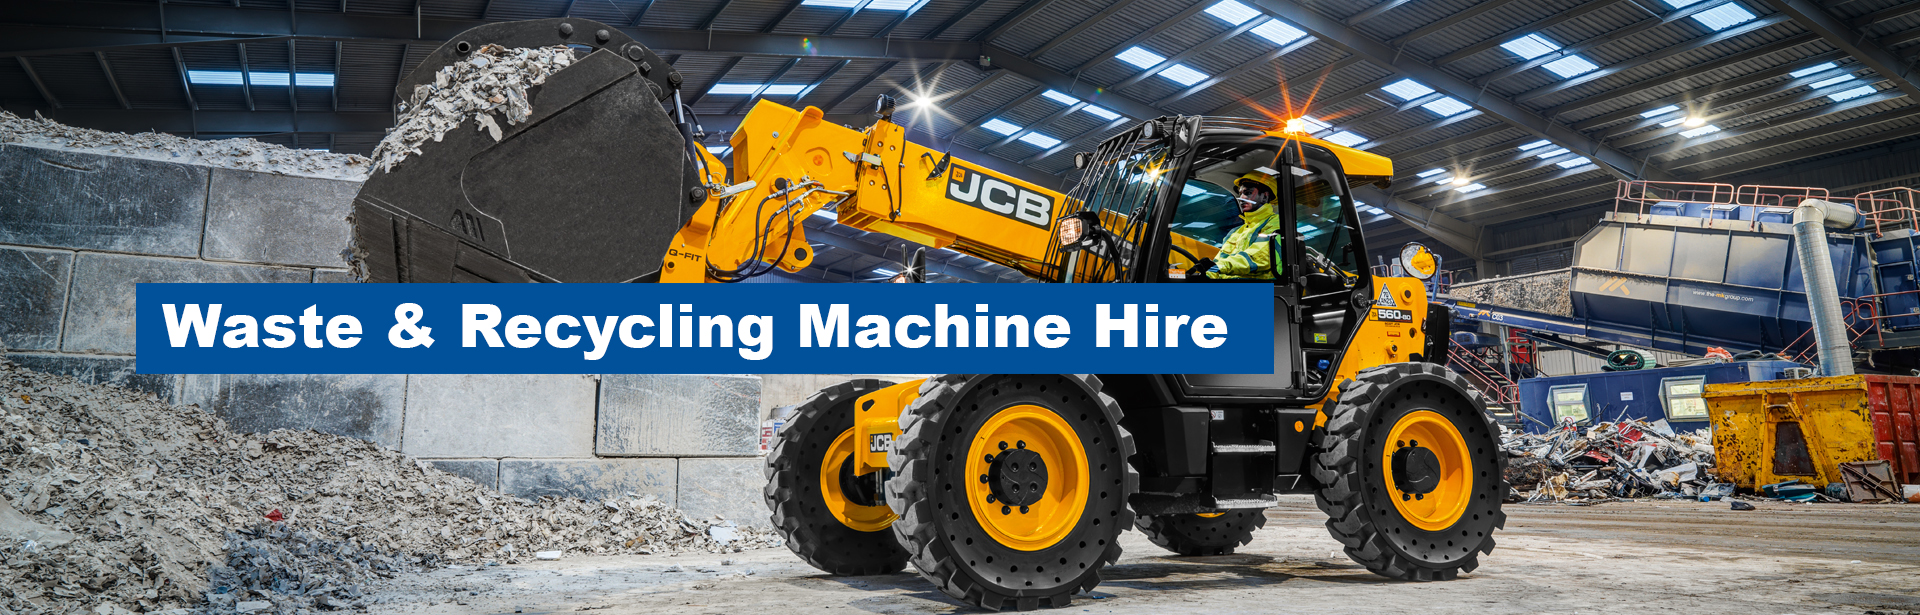 waste & recycling hire machines